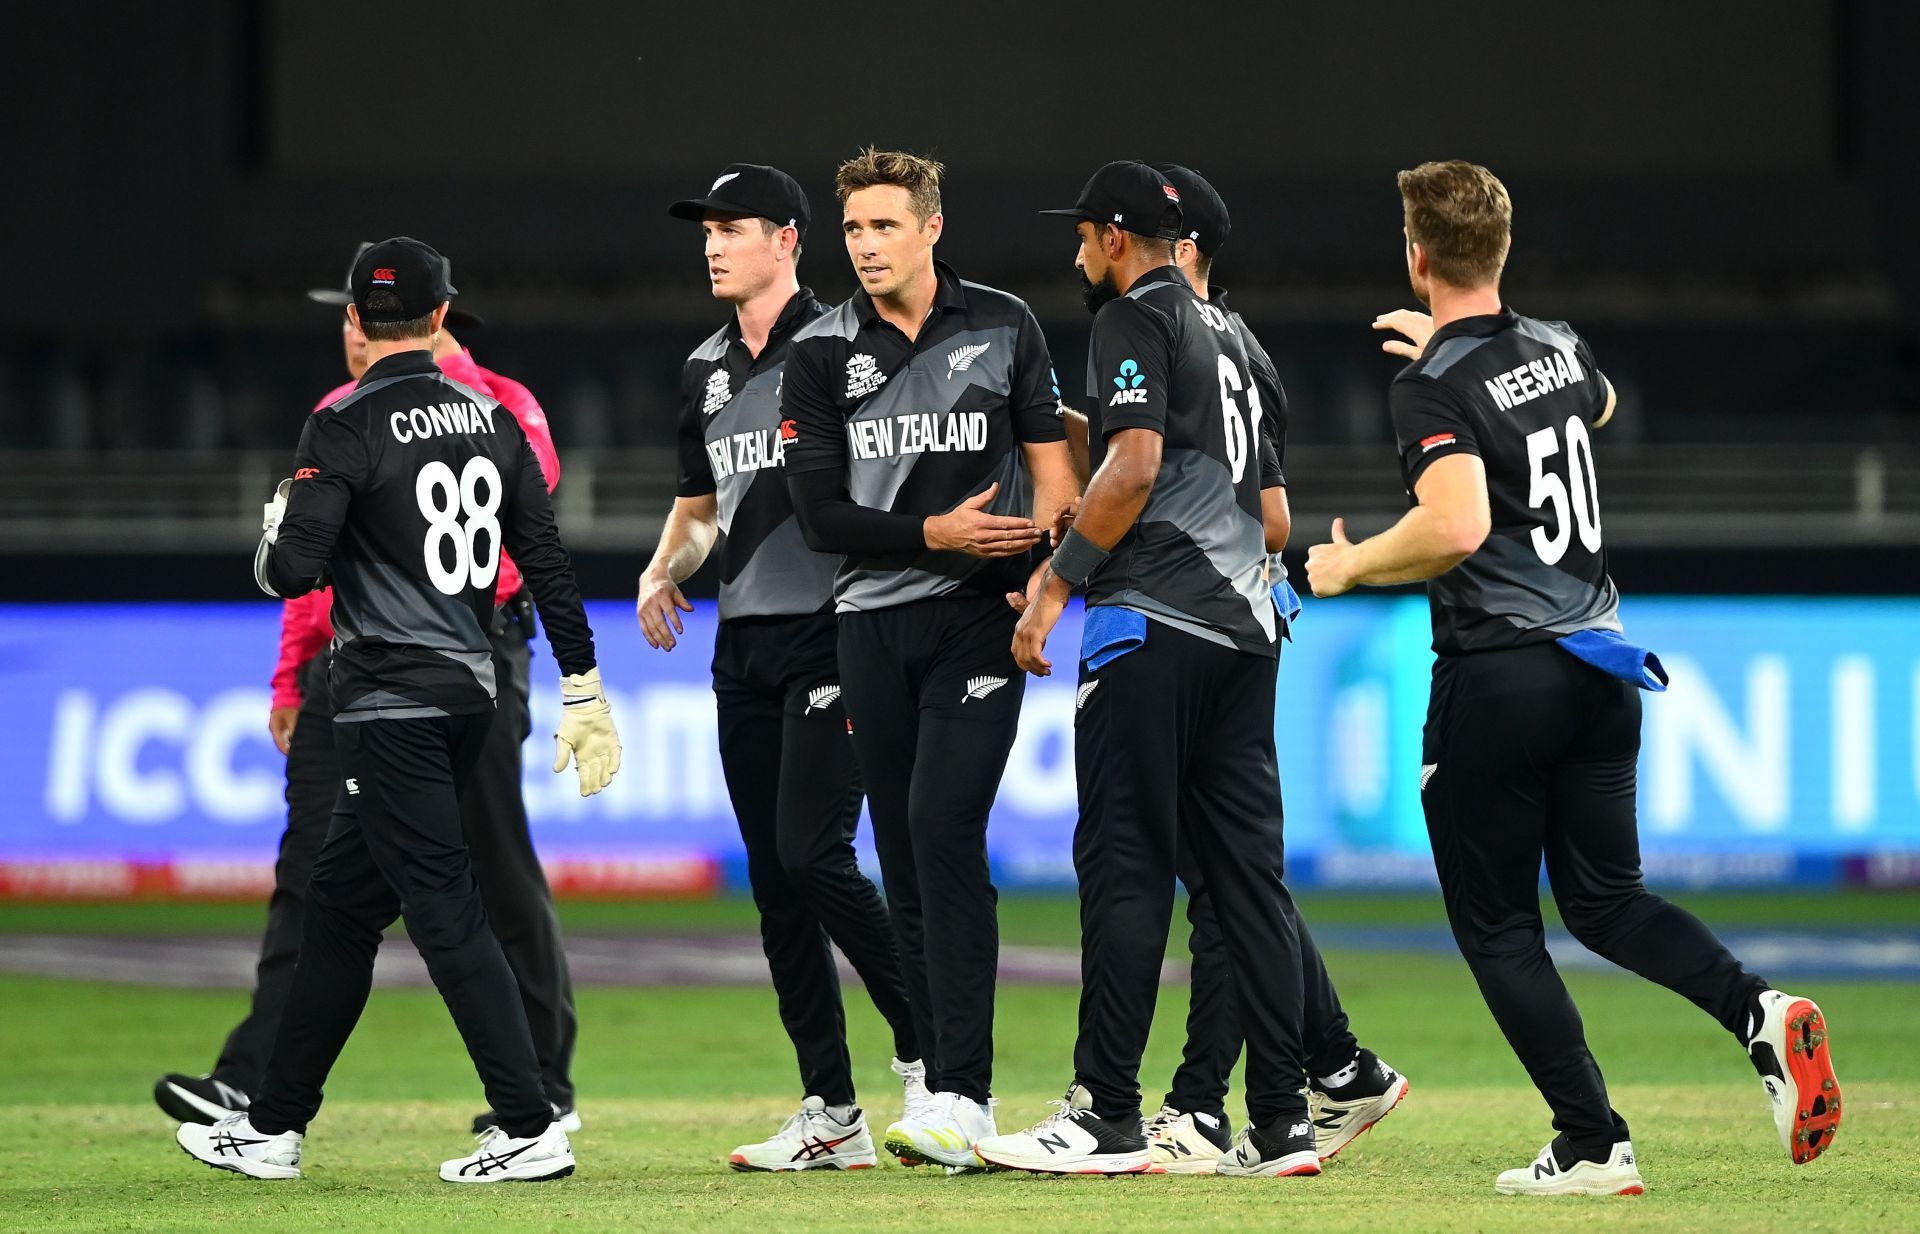 New Zealand players celebrate a wicket against India. Pic: Getty Images